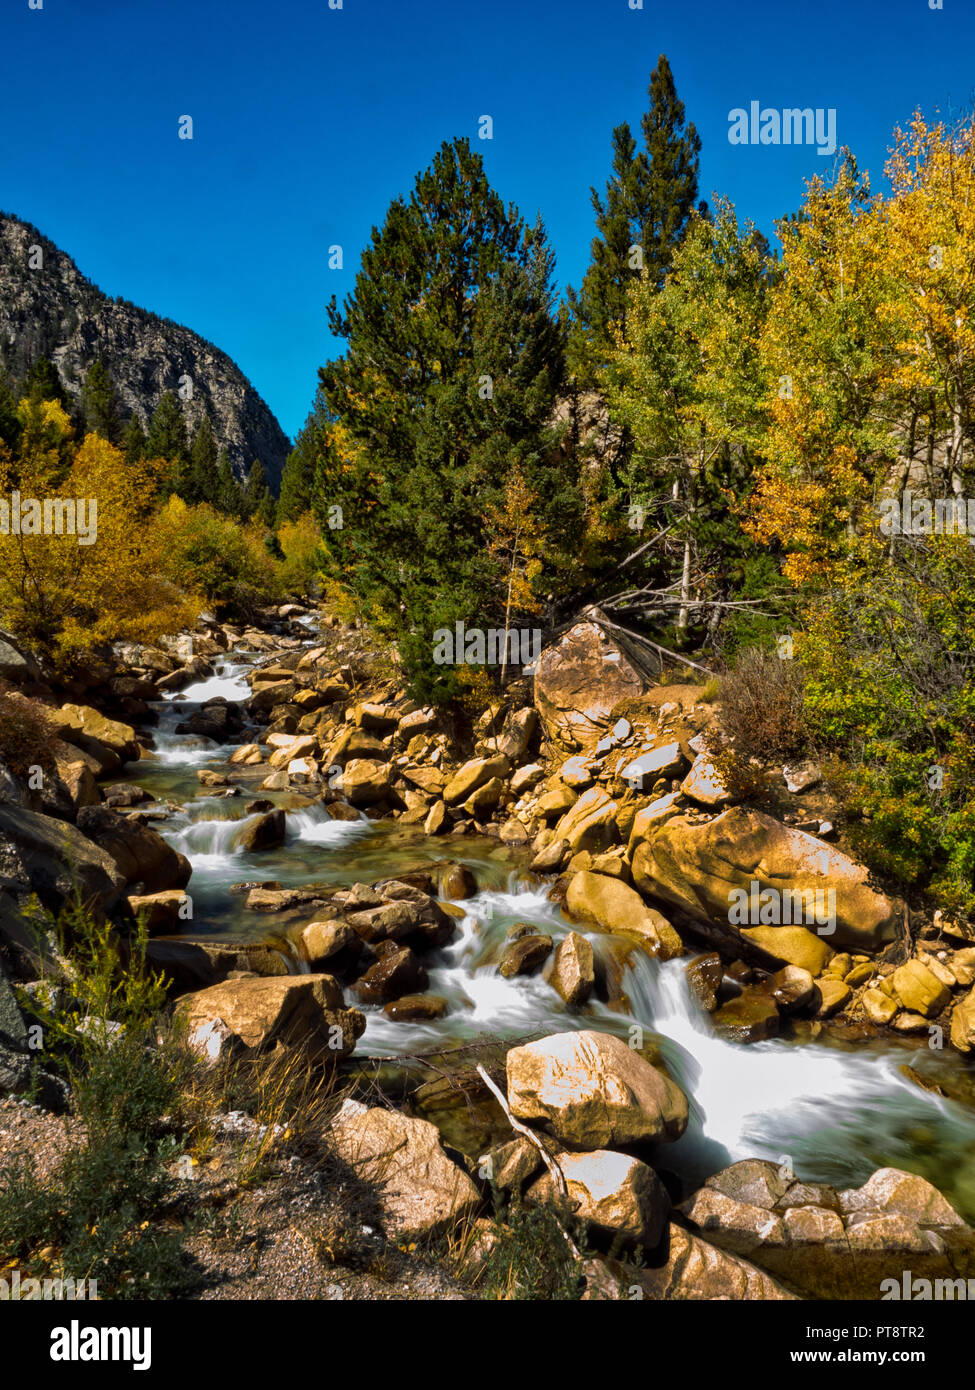 Acqua Bianca Creek in Pike e San Isabel National Forest in Colorado Foto Stock